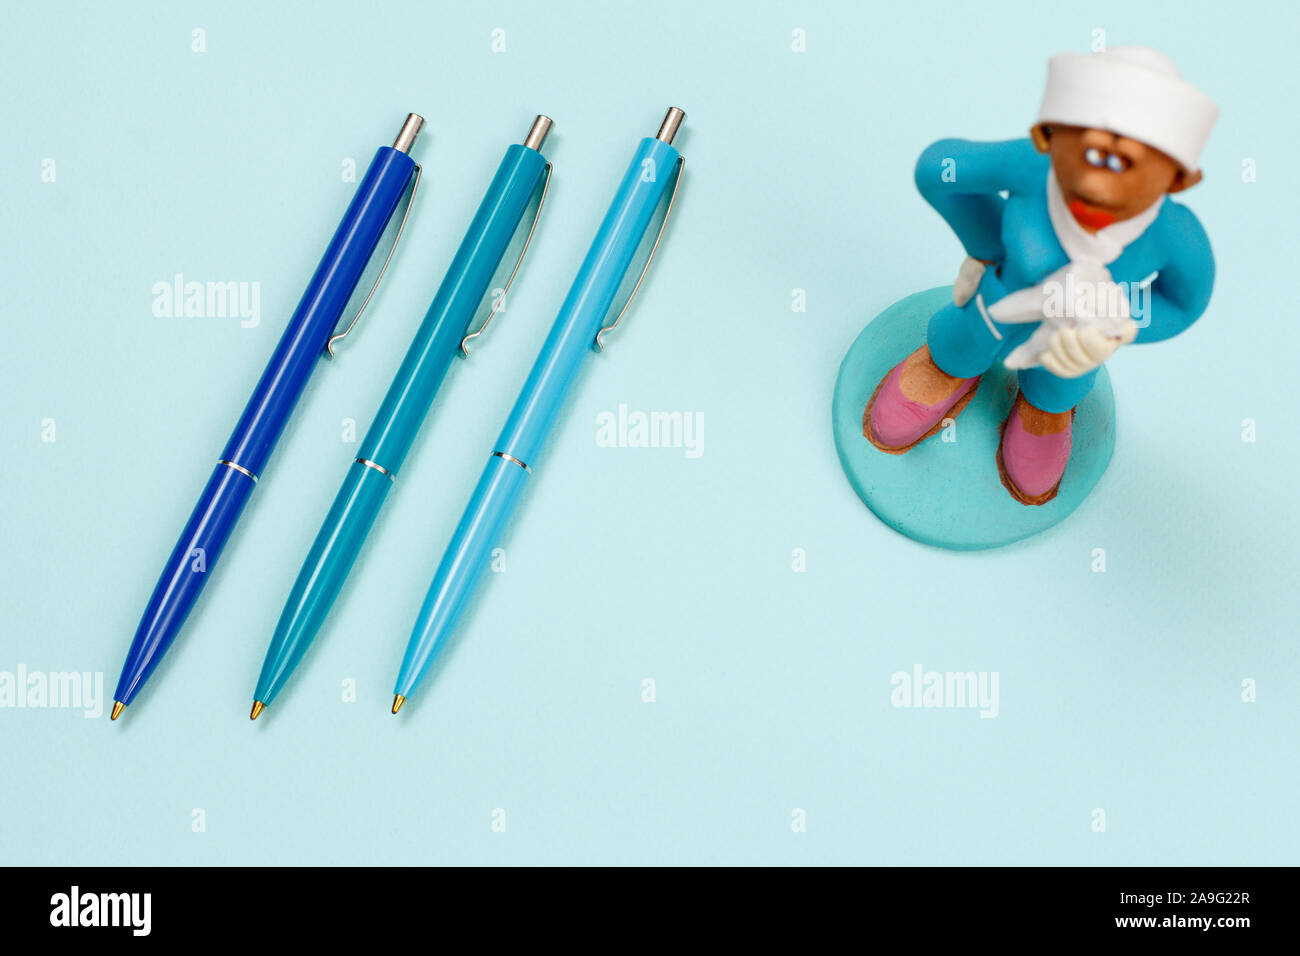 Three pens and plaster figure of a dentist on a blue background. Top view. Stock Photo